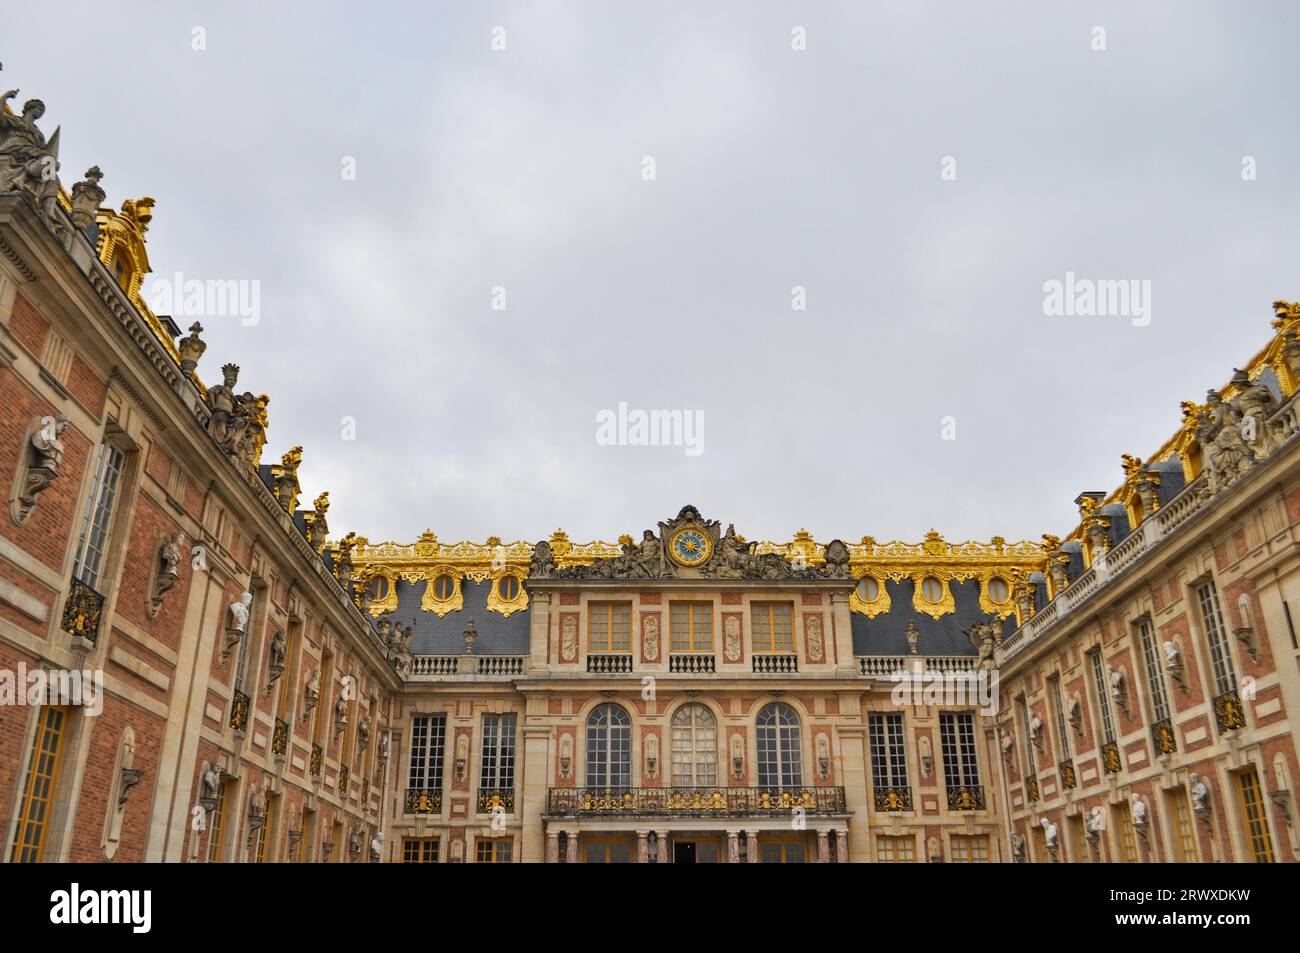 Front entrance of the Palace of Versailles in France with ornate gold leaf detail and French Baroque or classicism architectural style Stock Photo